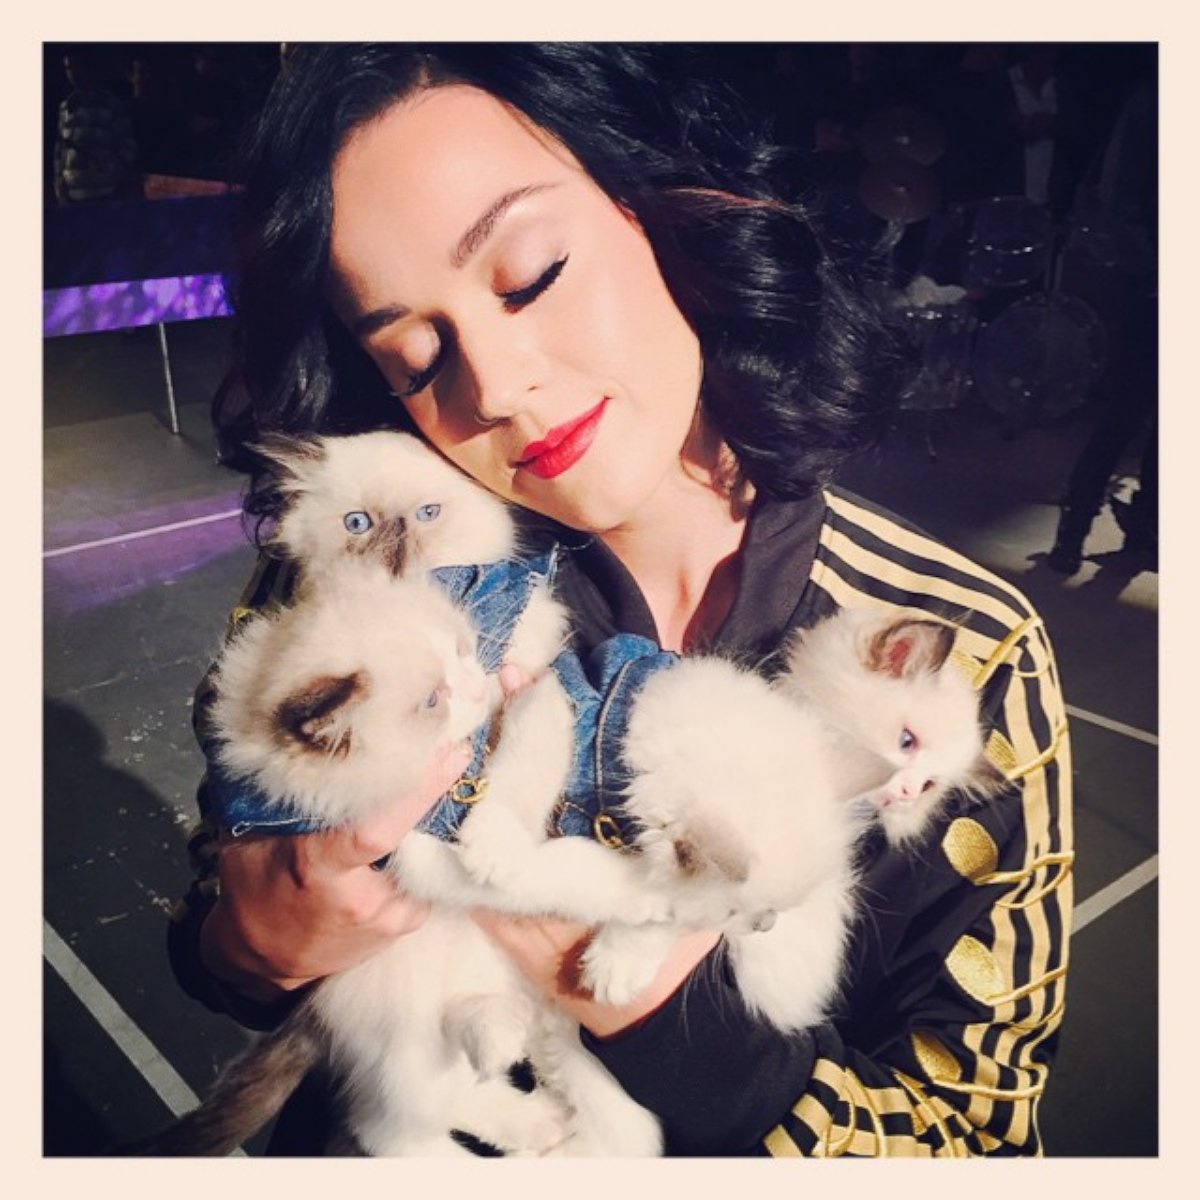 PHOTO: Katy Perry posted this photo to Instagram, Nov. 3, 2014, with the caption, "heaven in a place on earth."